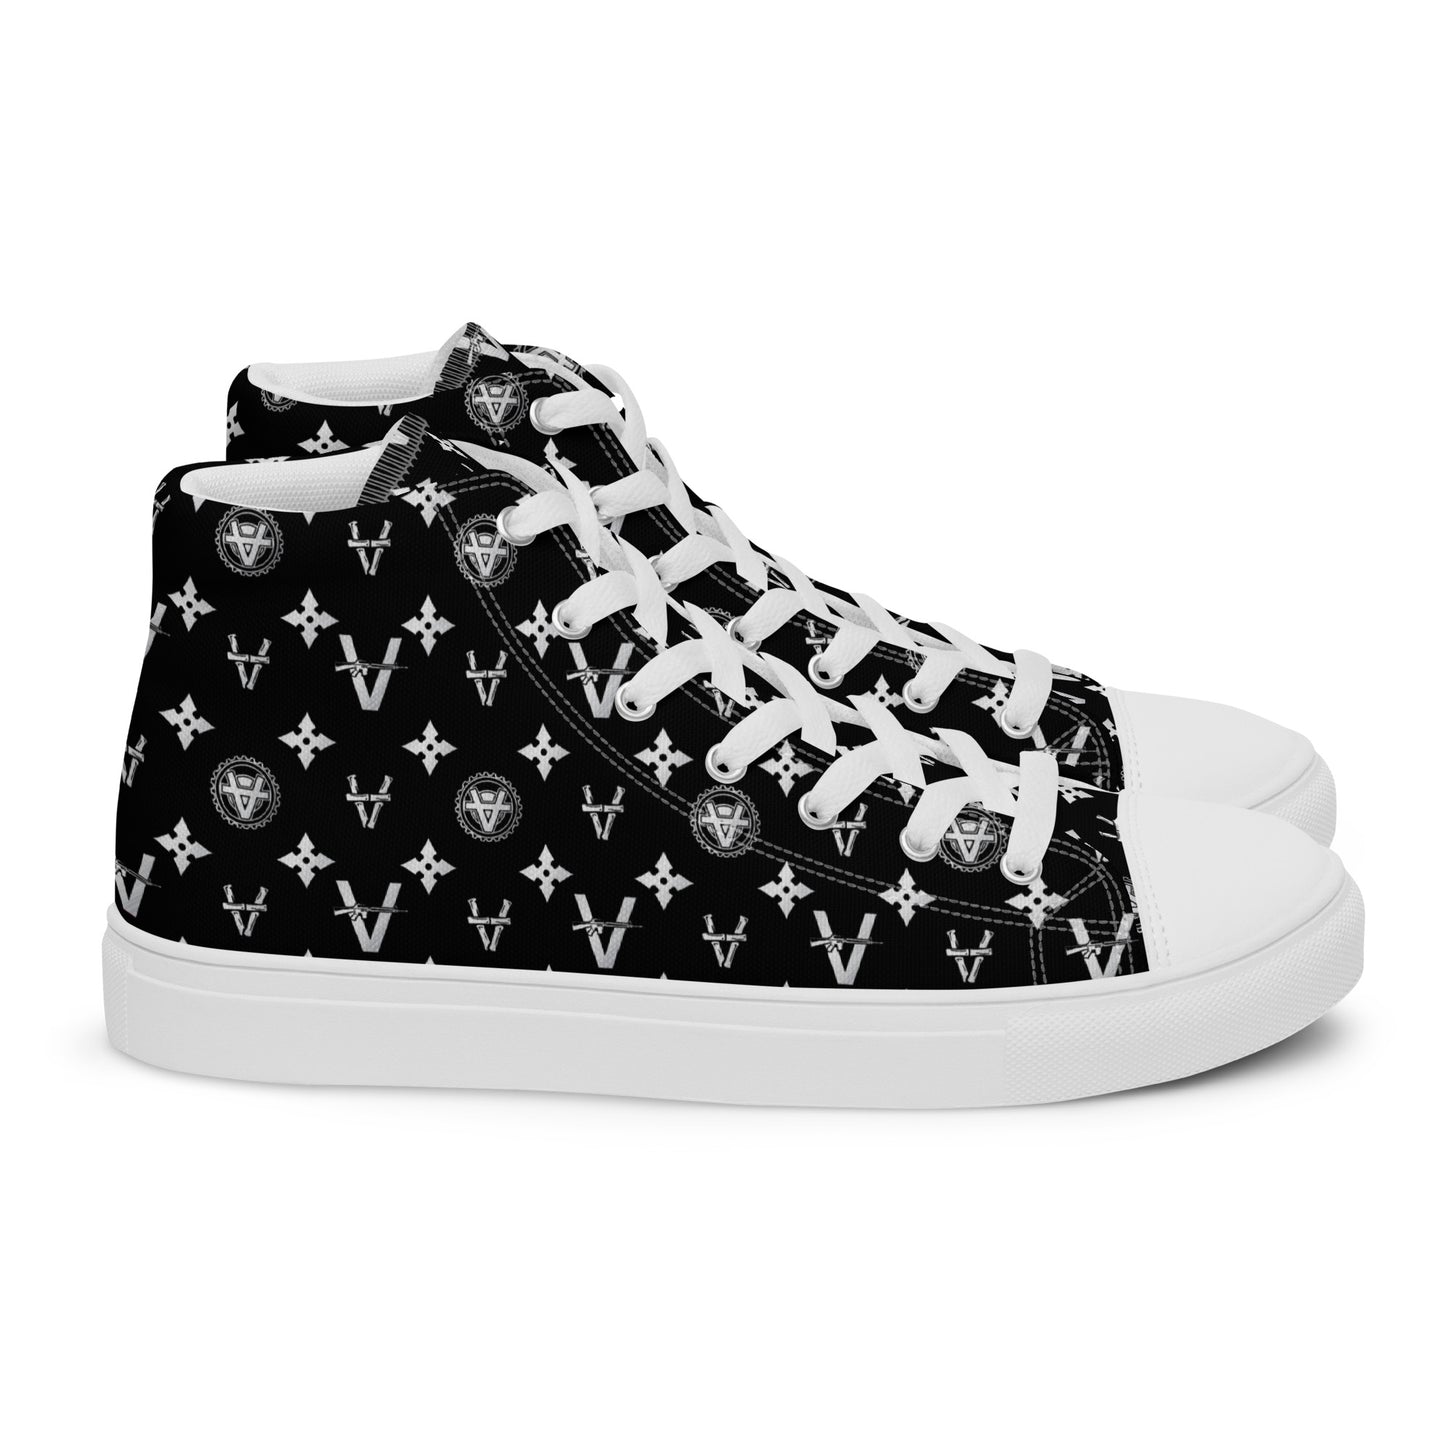 Vandals Canvas High Tops - Silver and Black Attack